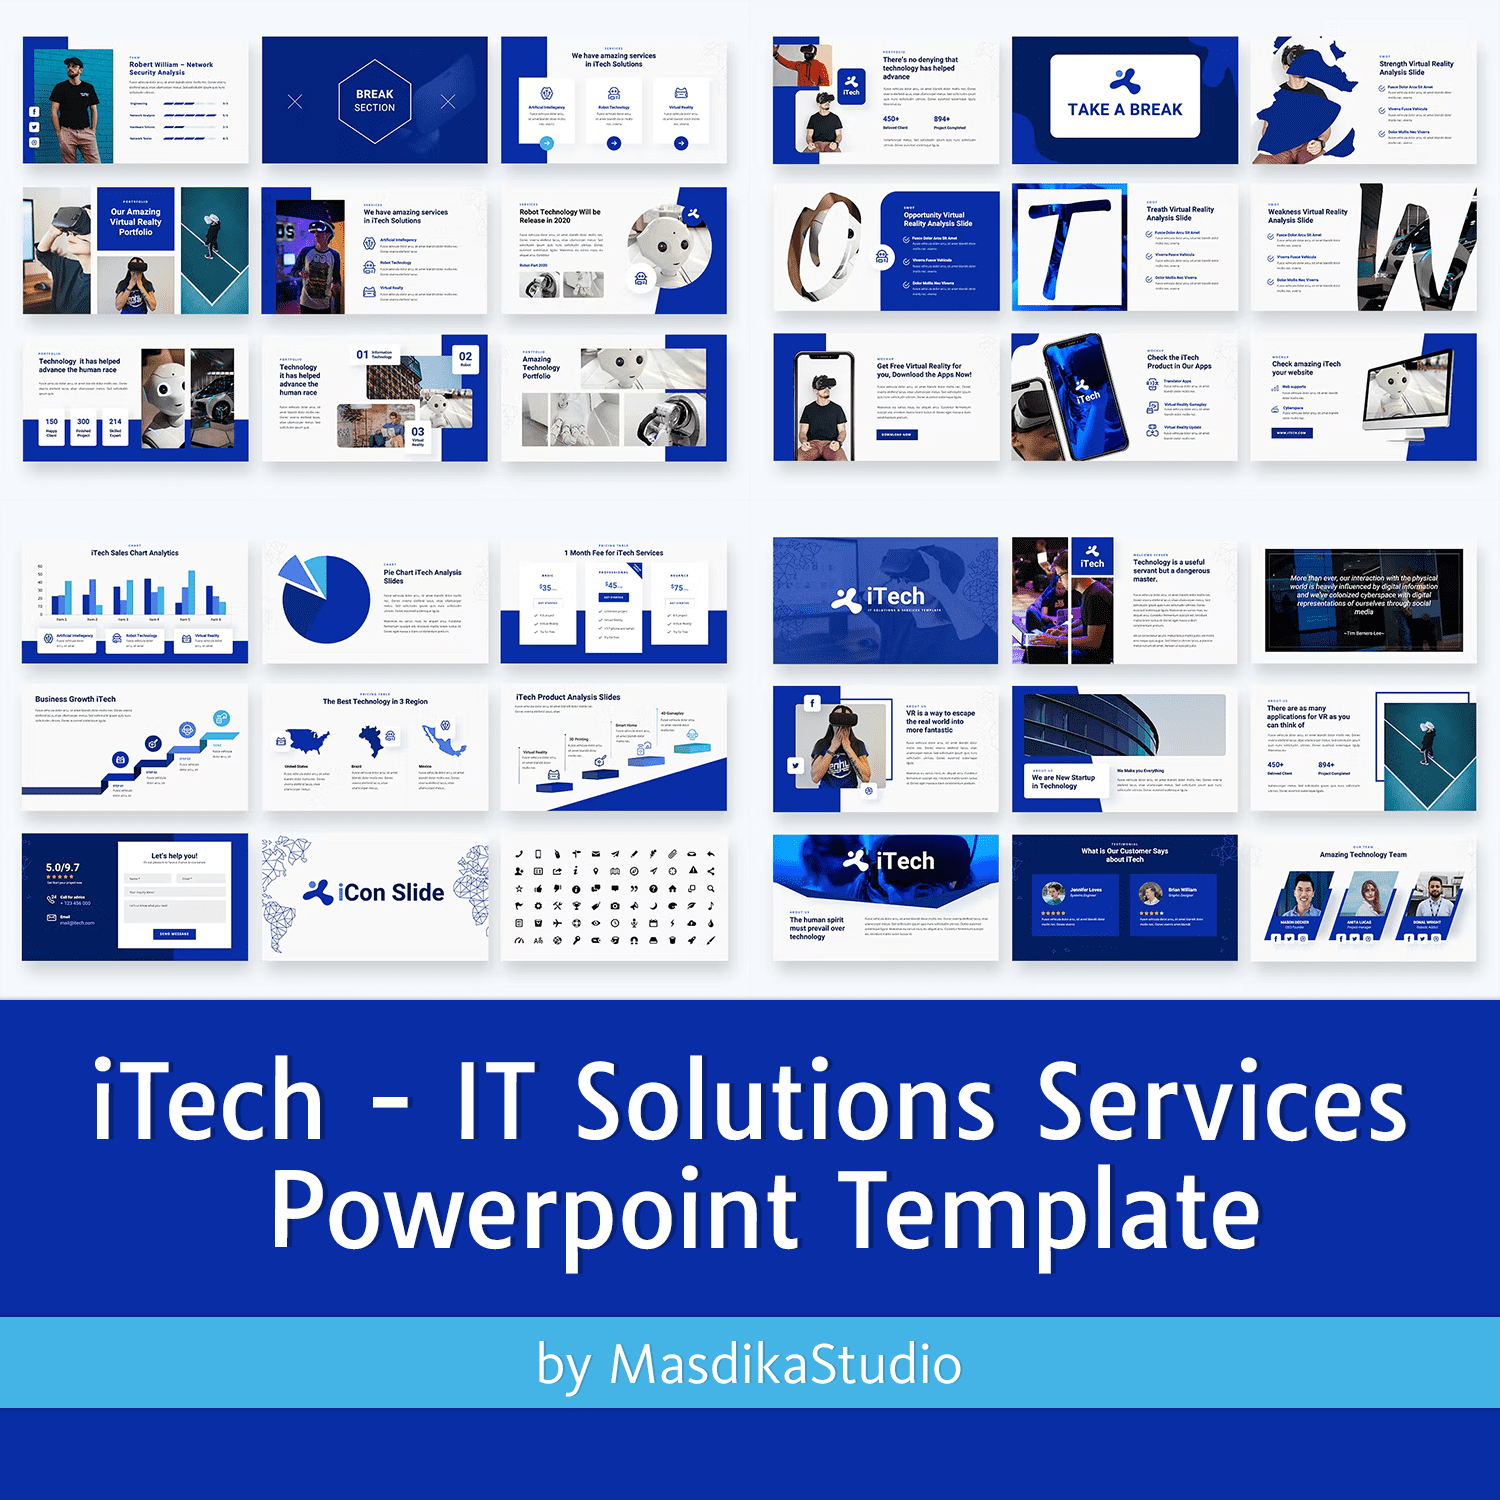 ITech — IT Solutions Powerpoint Template Cover.